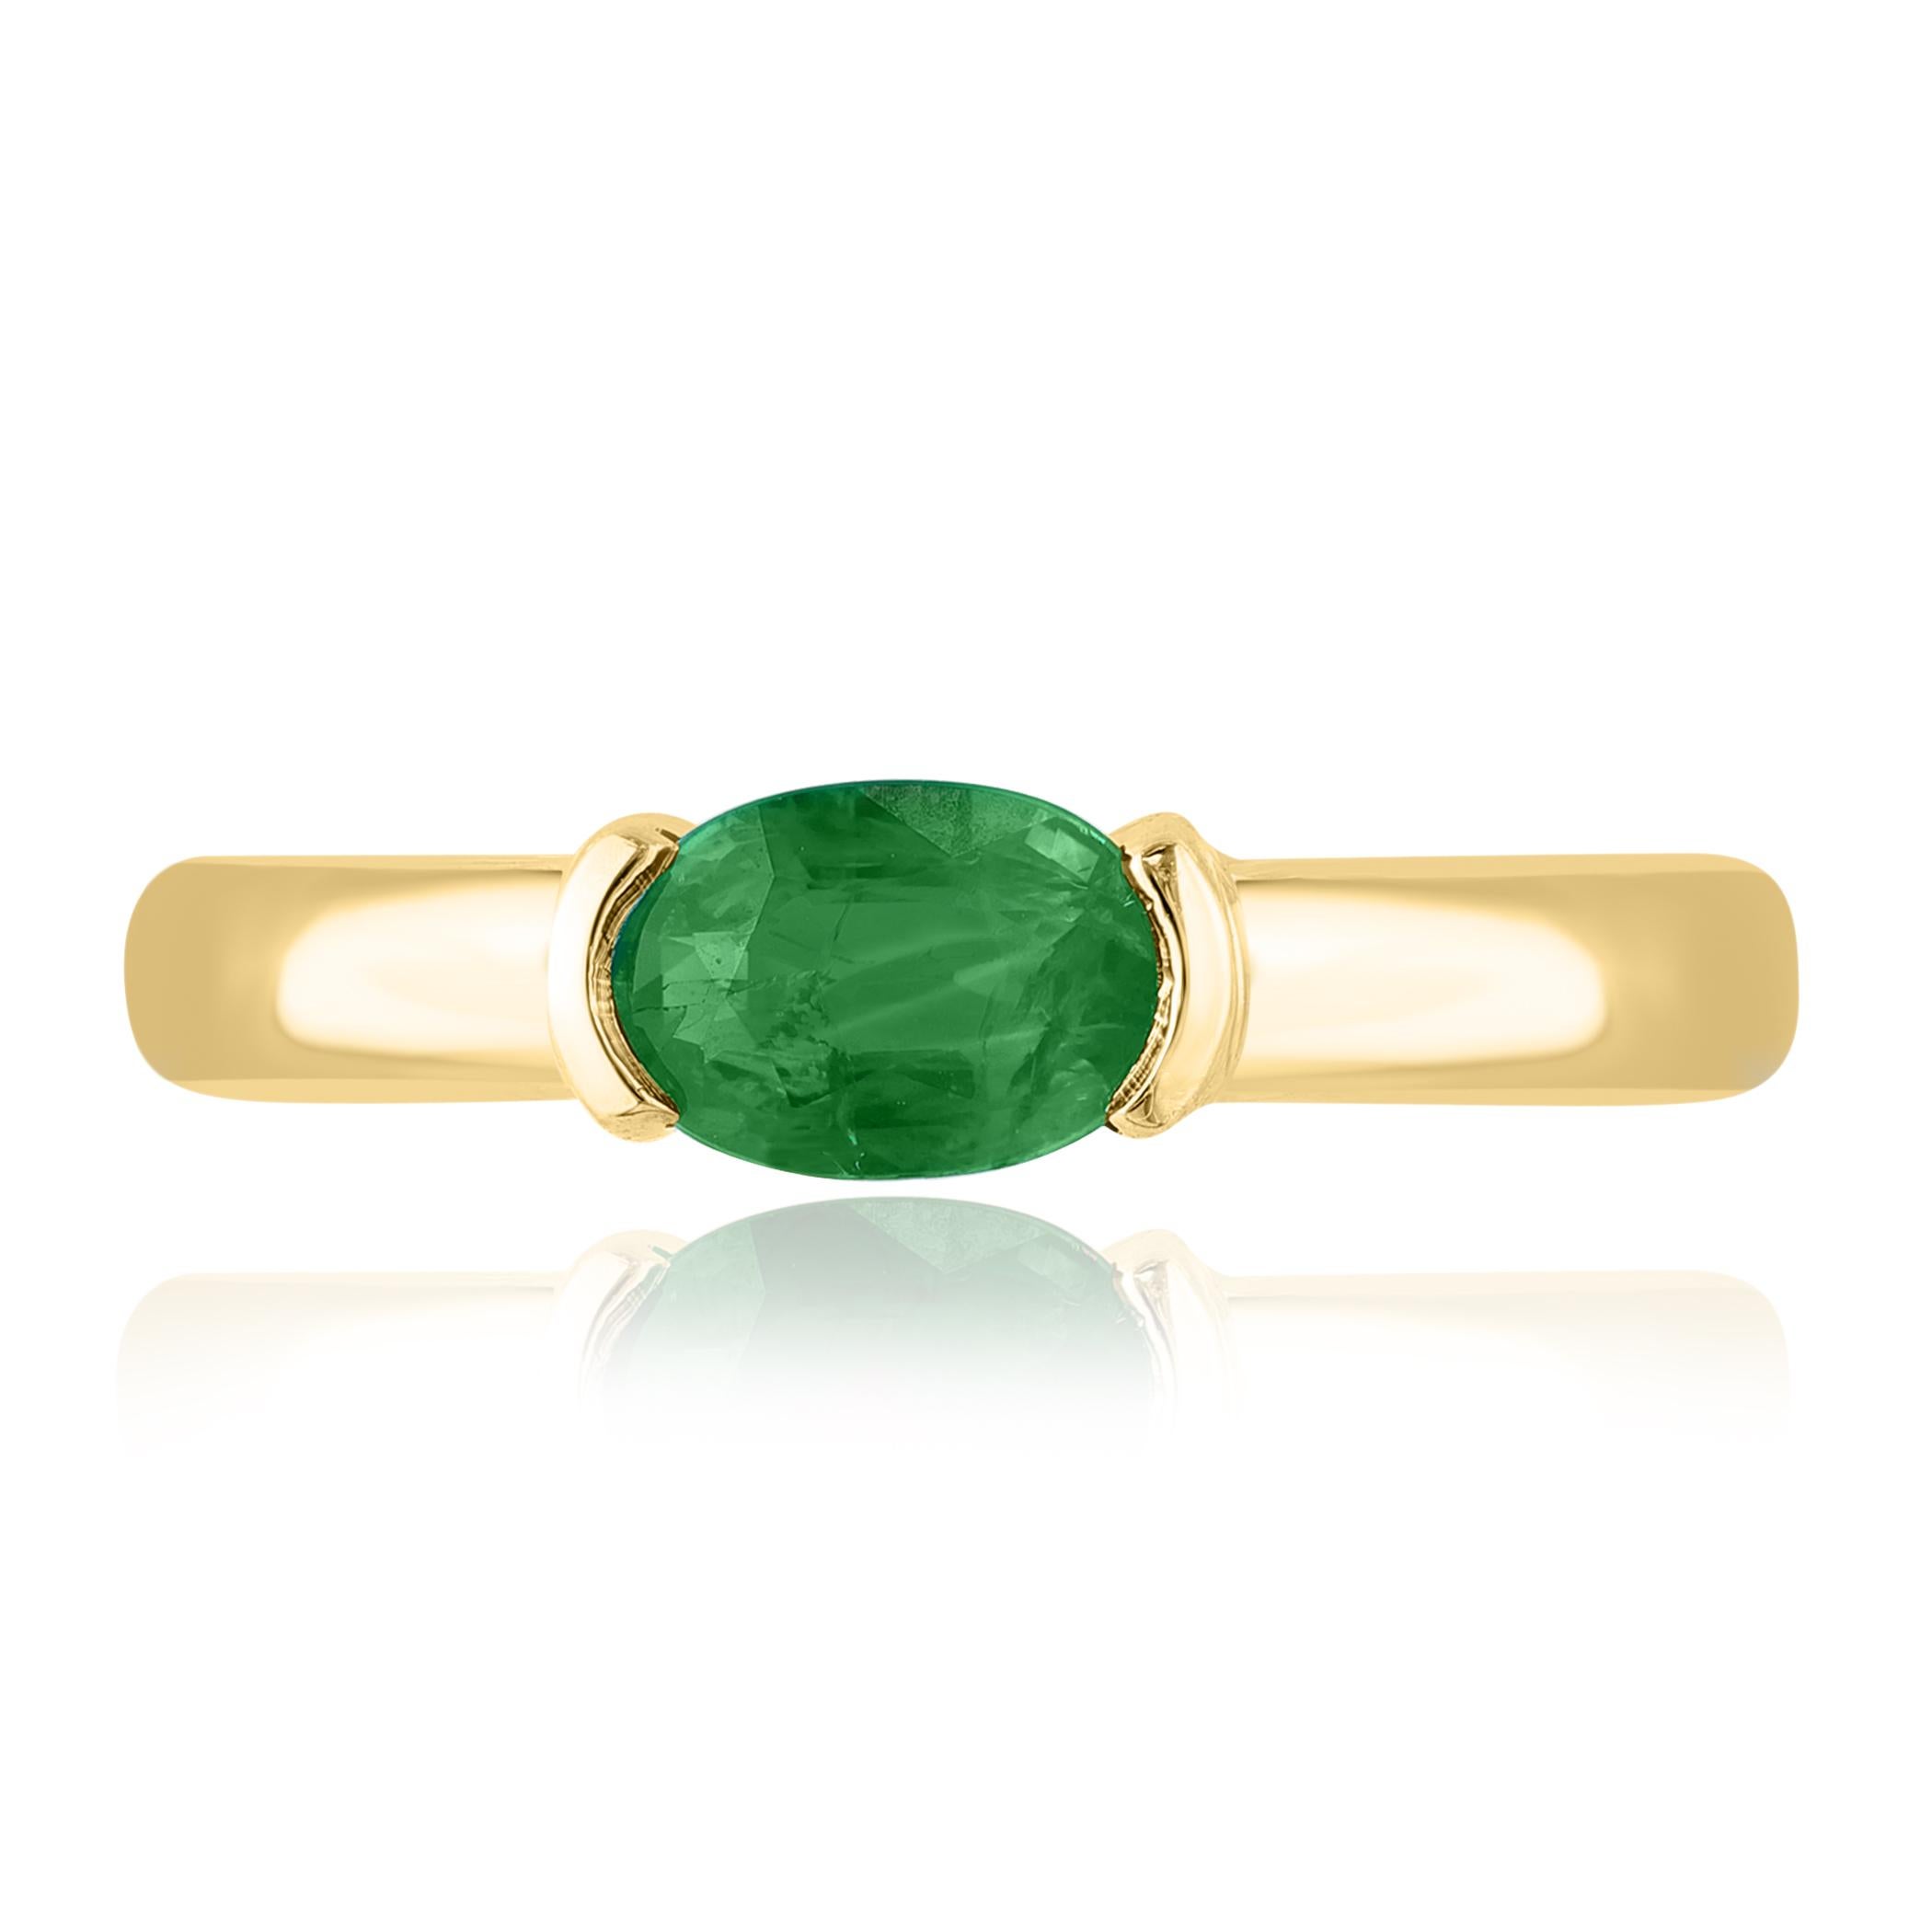 An elegant wedding band ring featuring an astonishing 0.77-carat oval cut emerald, set in a beautiful wide 14K Yellow gold band. 

Style is available in different price ranges. Prices are based on your selection. Don't hesitate to get in touch with